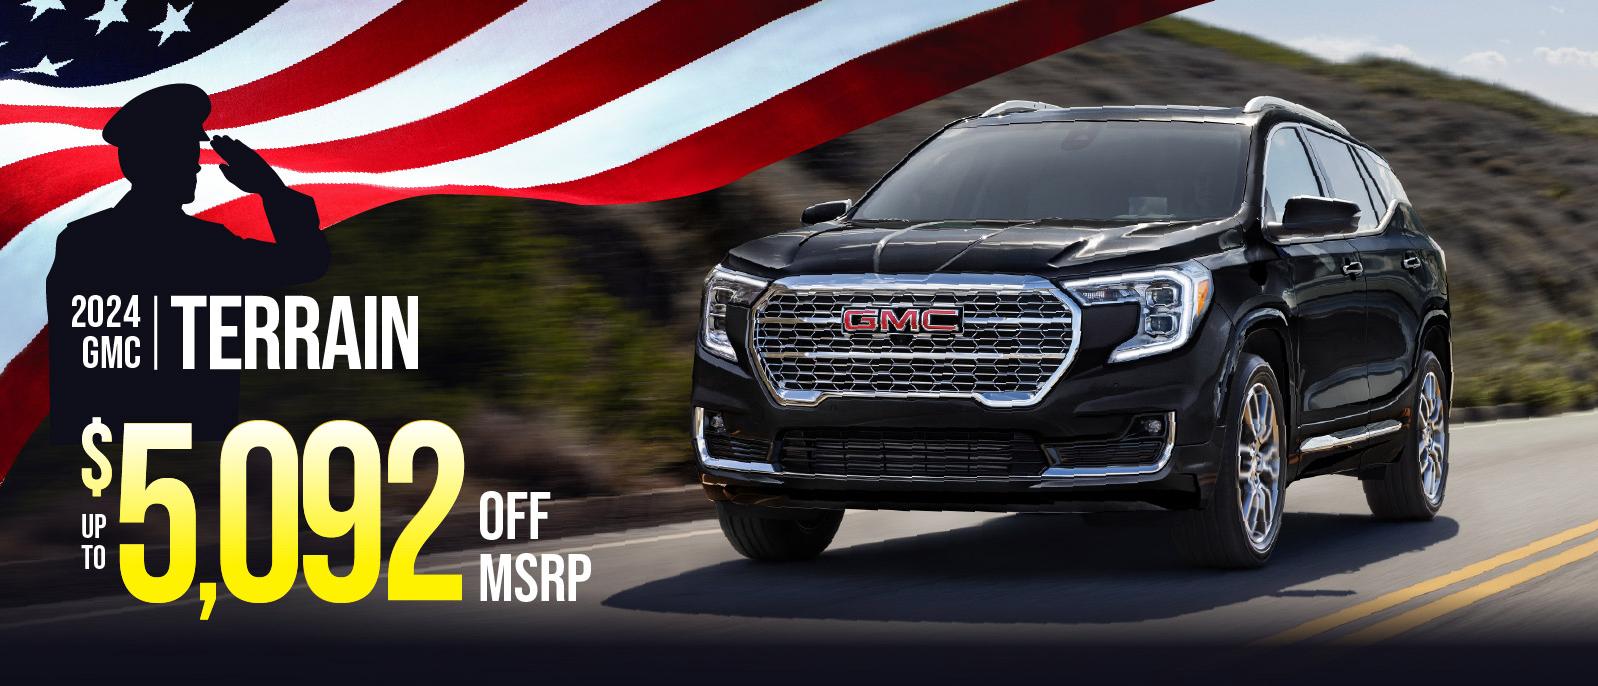 2024 GMC Terrain - up to $5092 OFF MSRP